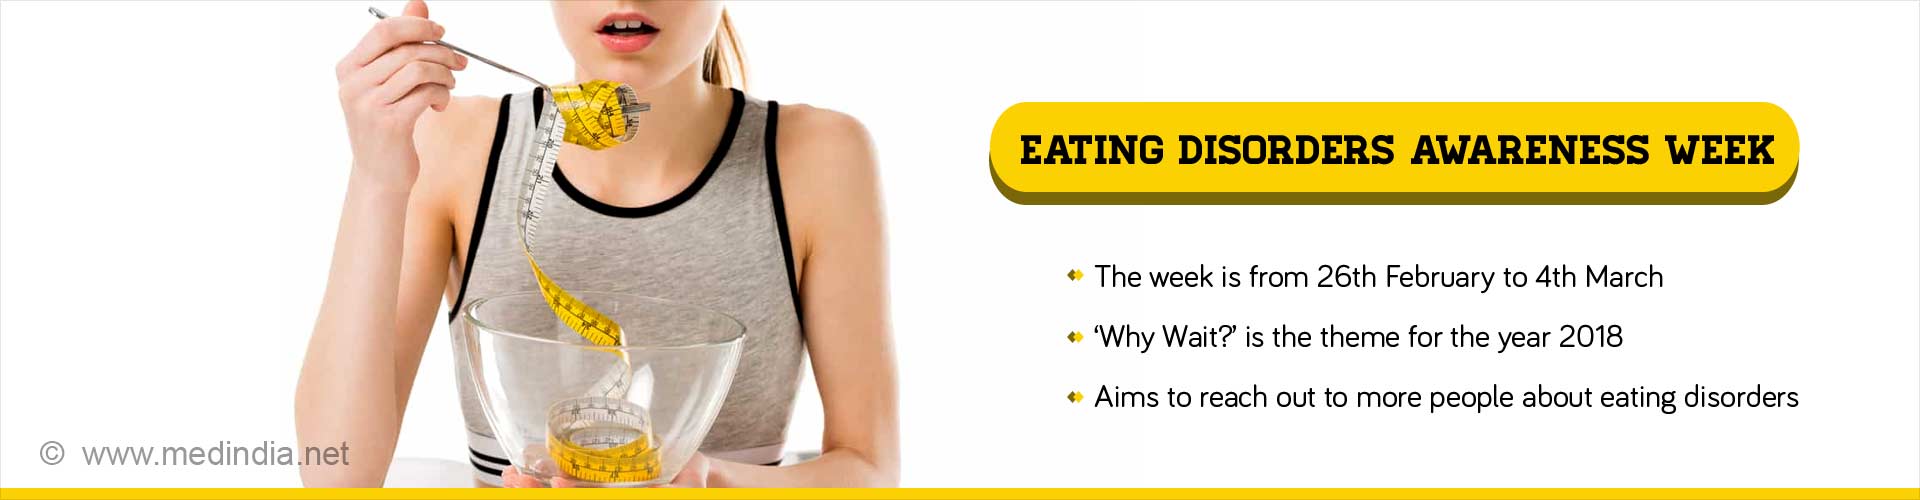 eating dis-orders awareness week 2018
- the week is from 26th feb-4th march
- what wait? is the theme for the year 2018
- aims to reach out to more people about eating disorders